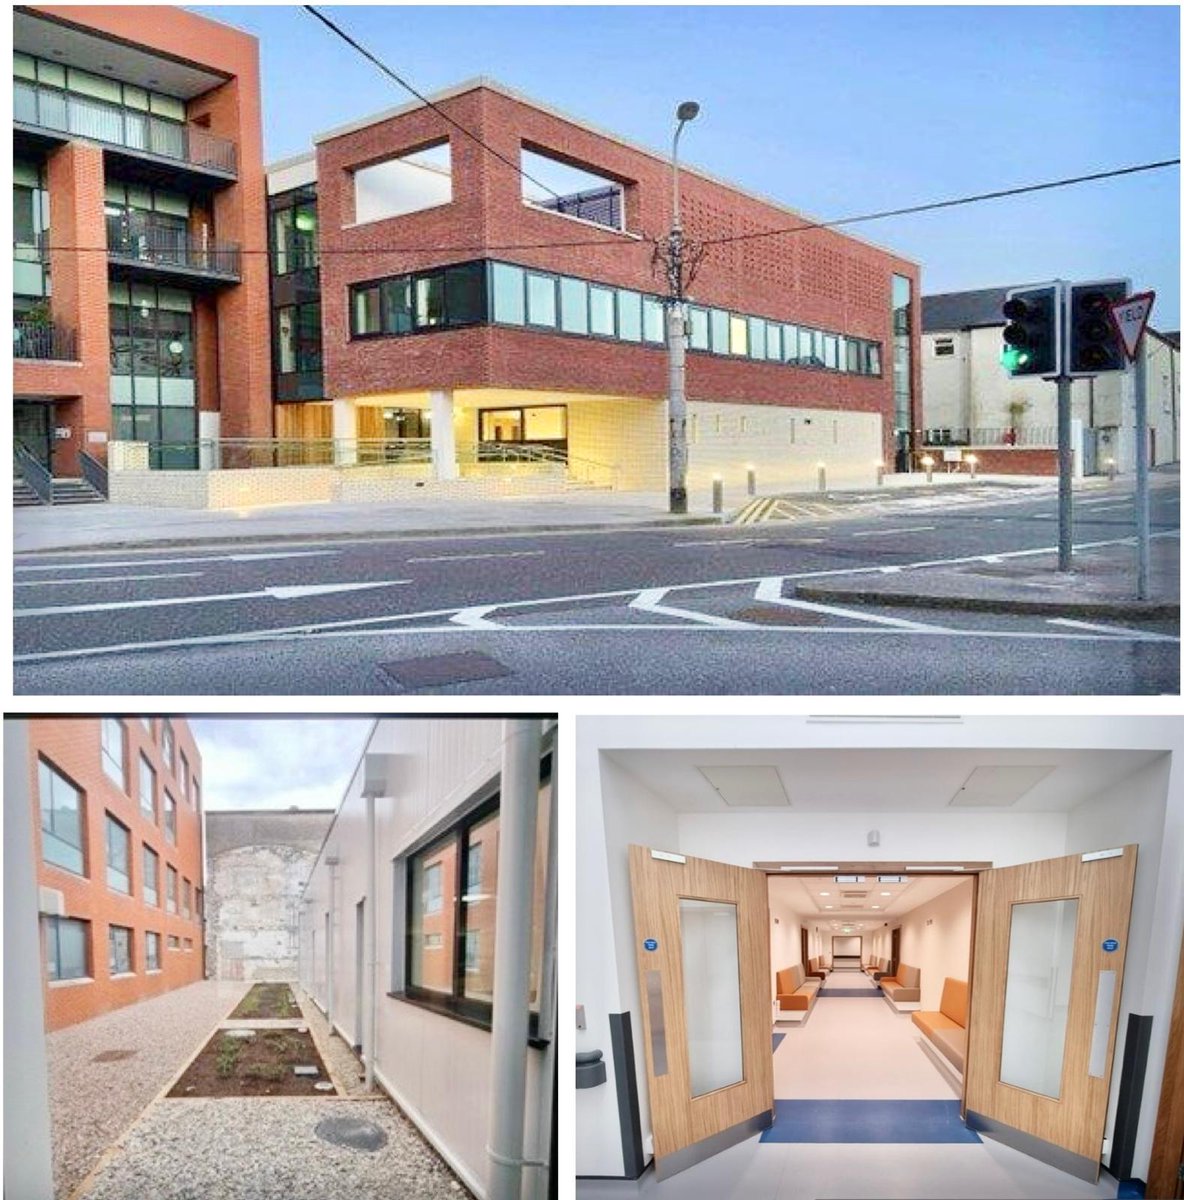 The Capital and Estates Team South is pleased to share views of the newly constructed modern Ophthalmology patient Outpatient Department building located at @SIVUH South Terrace, Cork City.